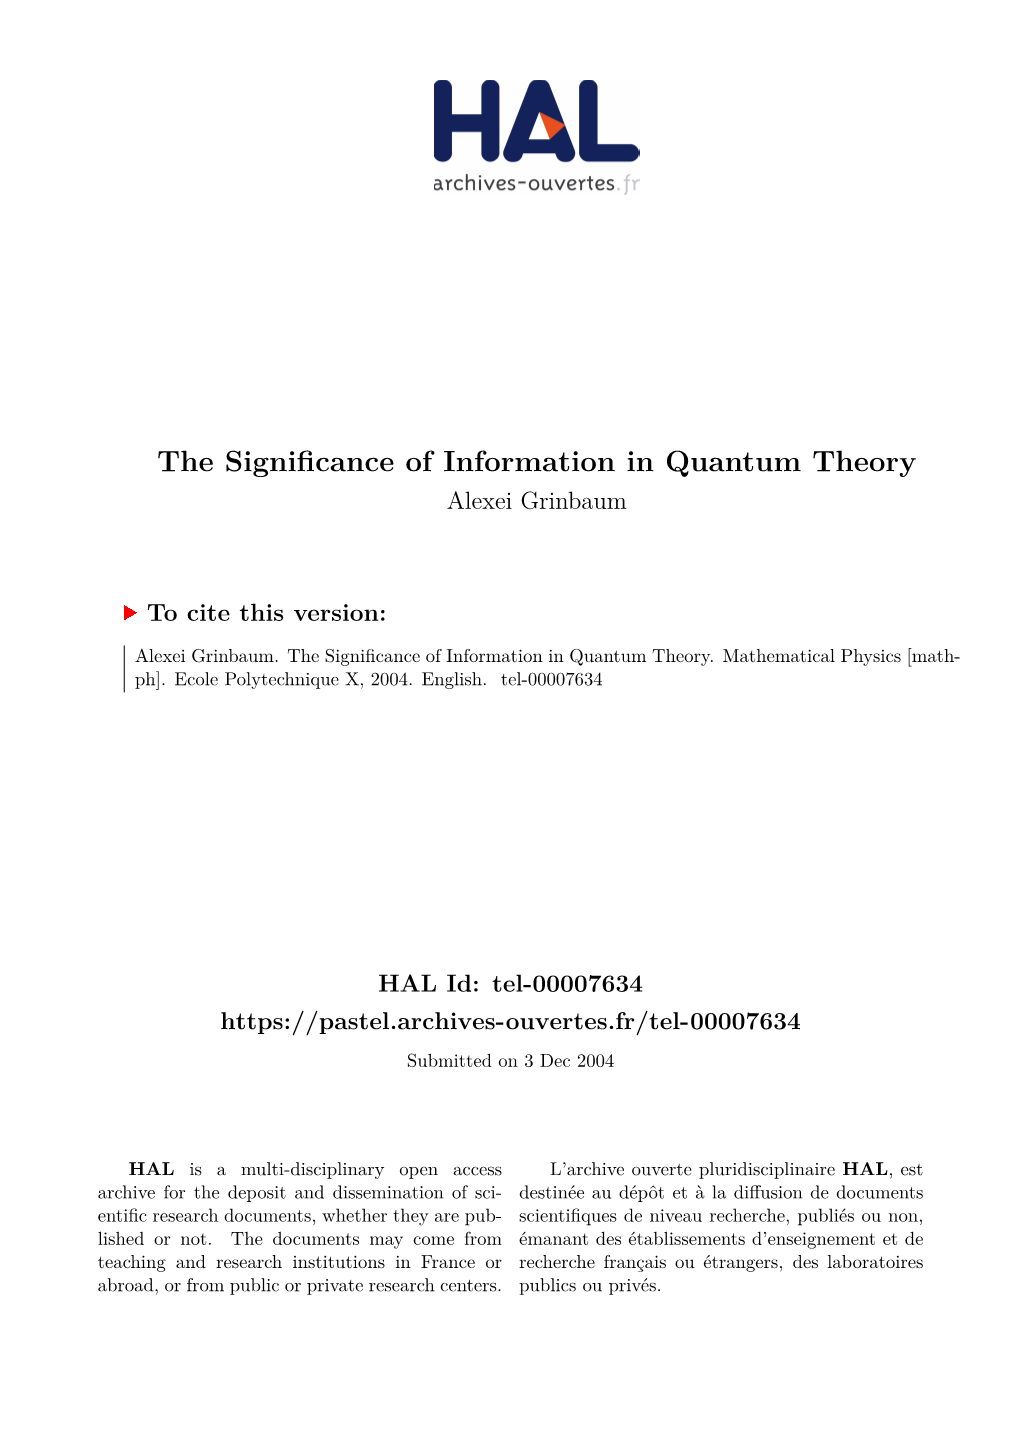 The Significance of Information in Quantum Theory Alexei Grinbaum